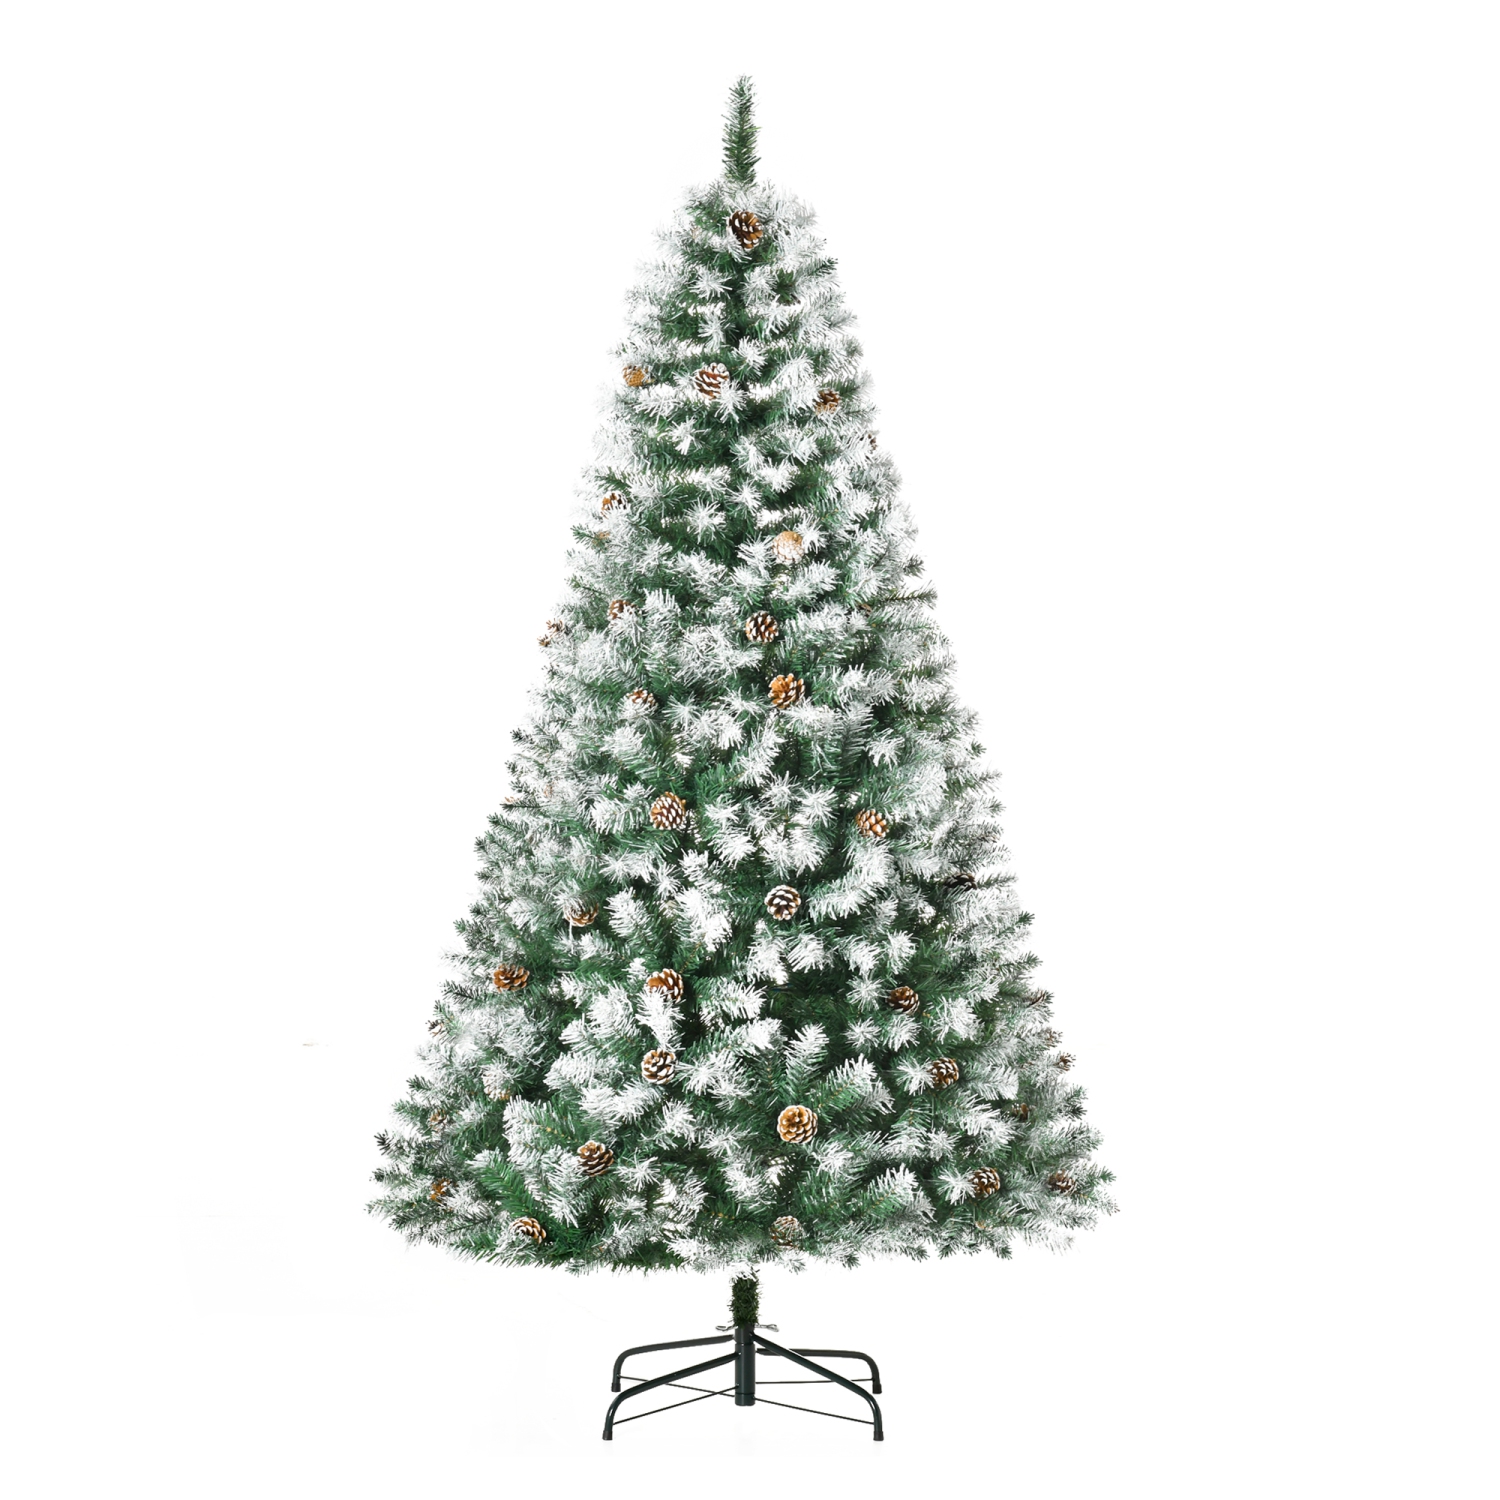 HOMCOM 6ft Snow Flocked Artificial Christmas Tree, Unlit Full Fir Tree with Automatic Open, 800 Realistic Branches and 61 Pine Cones